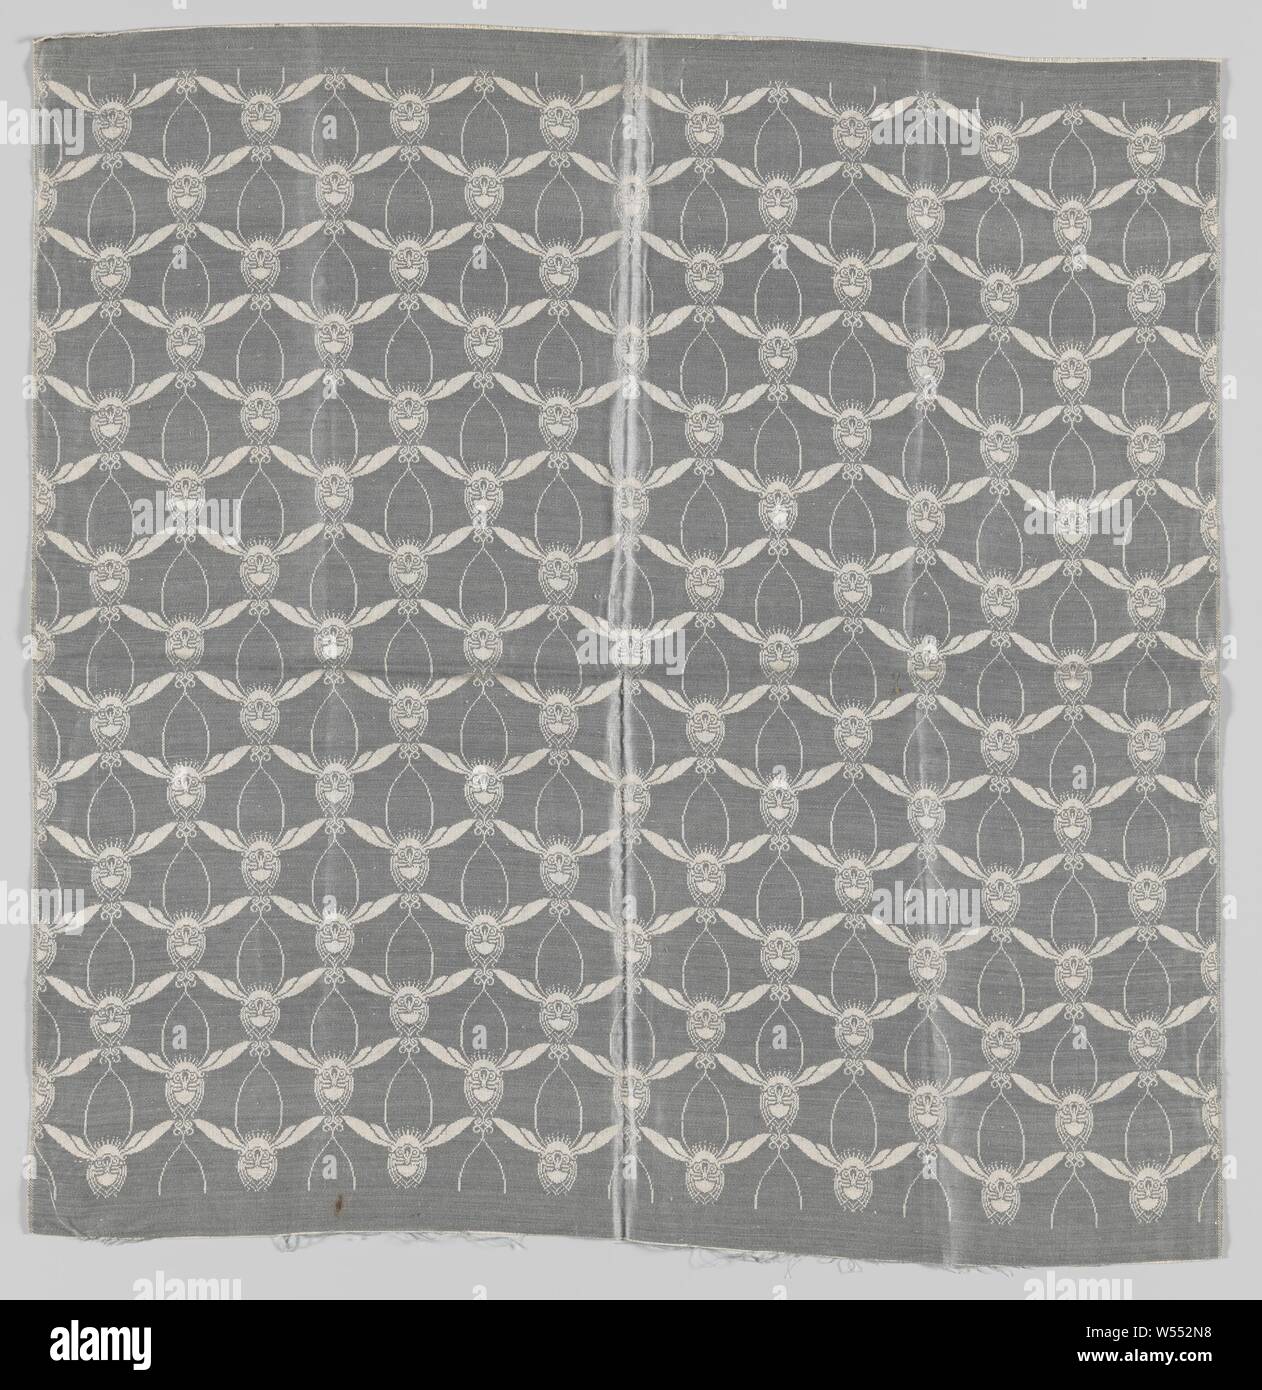 Steel fabric from linen damask with 'Wild Flight' design, Steel fabric from linen damask with a pattern of bees (or birds) in wild flight, in natural on a gray-blue ground., Chris Lebeau, Eindhoven, 1911 - 1915, linen (material), damask, h 59.0 cm × w 58.5 cm Stock Photo